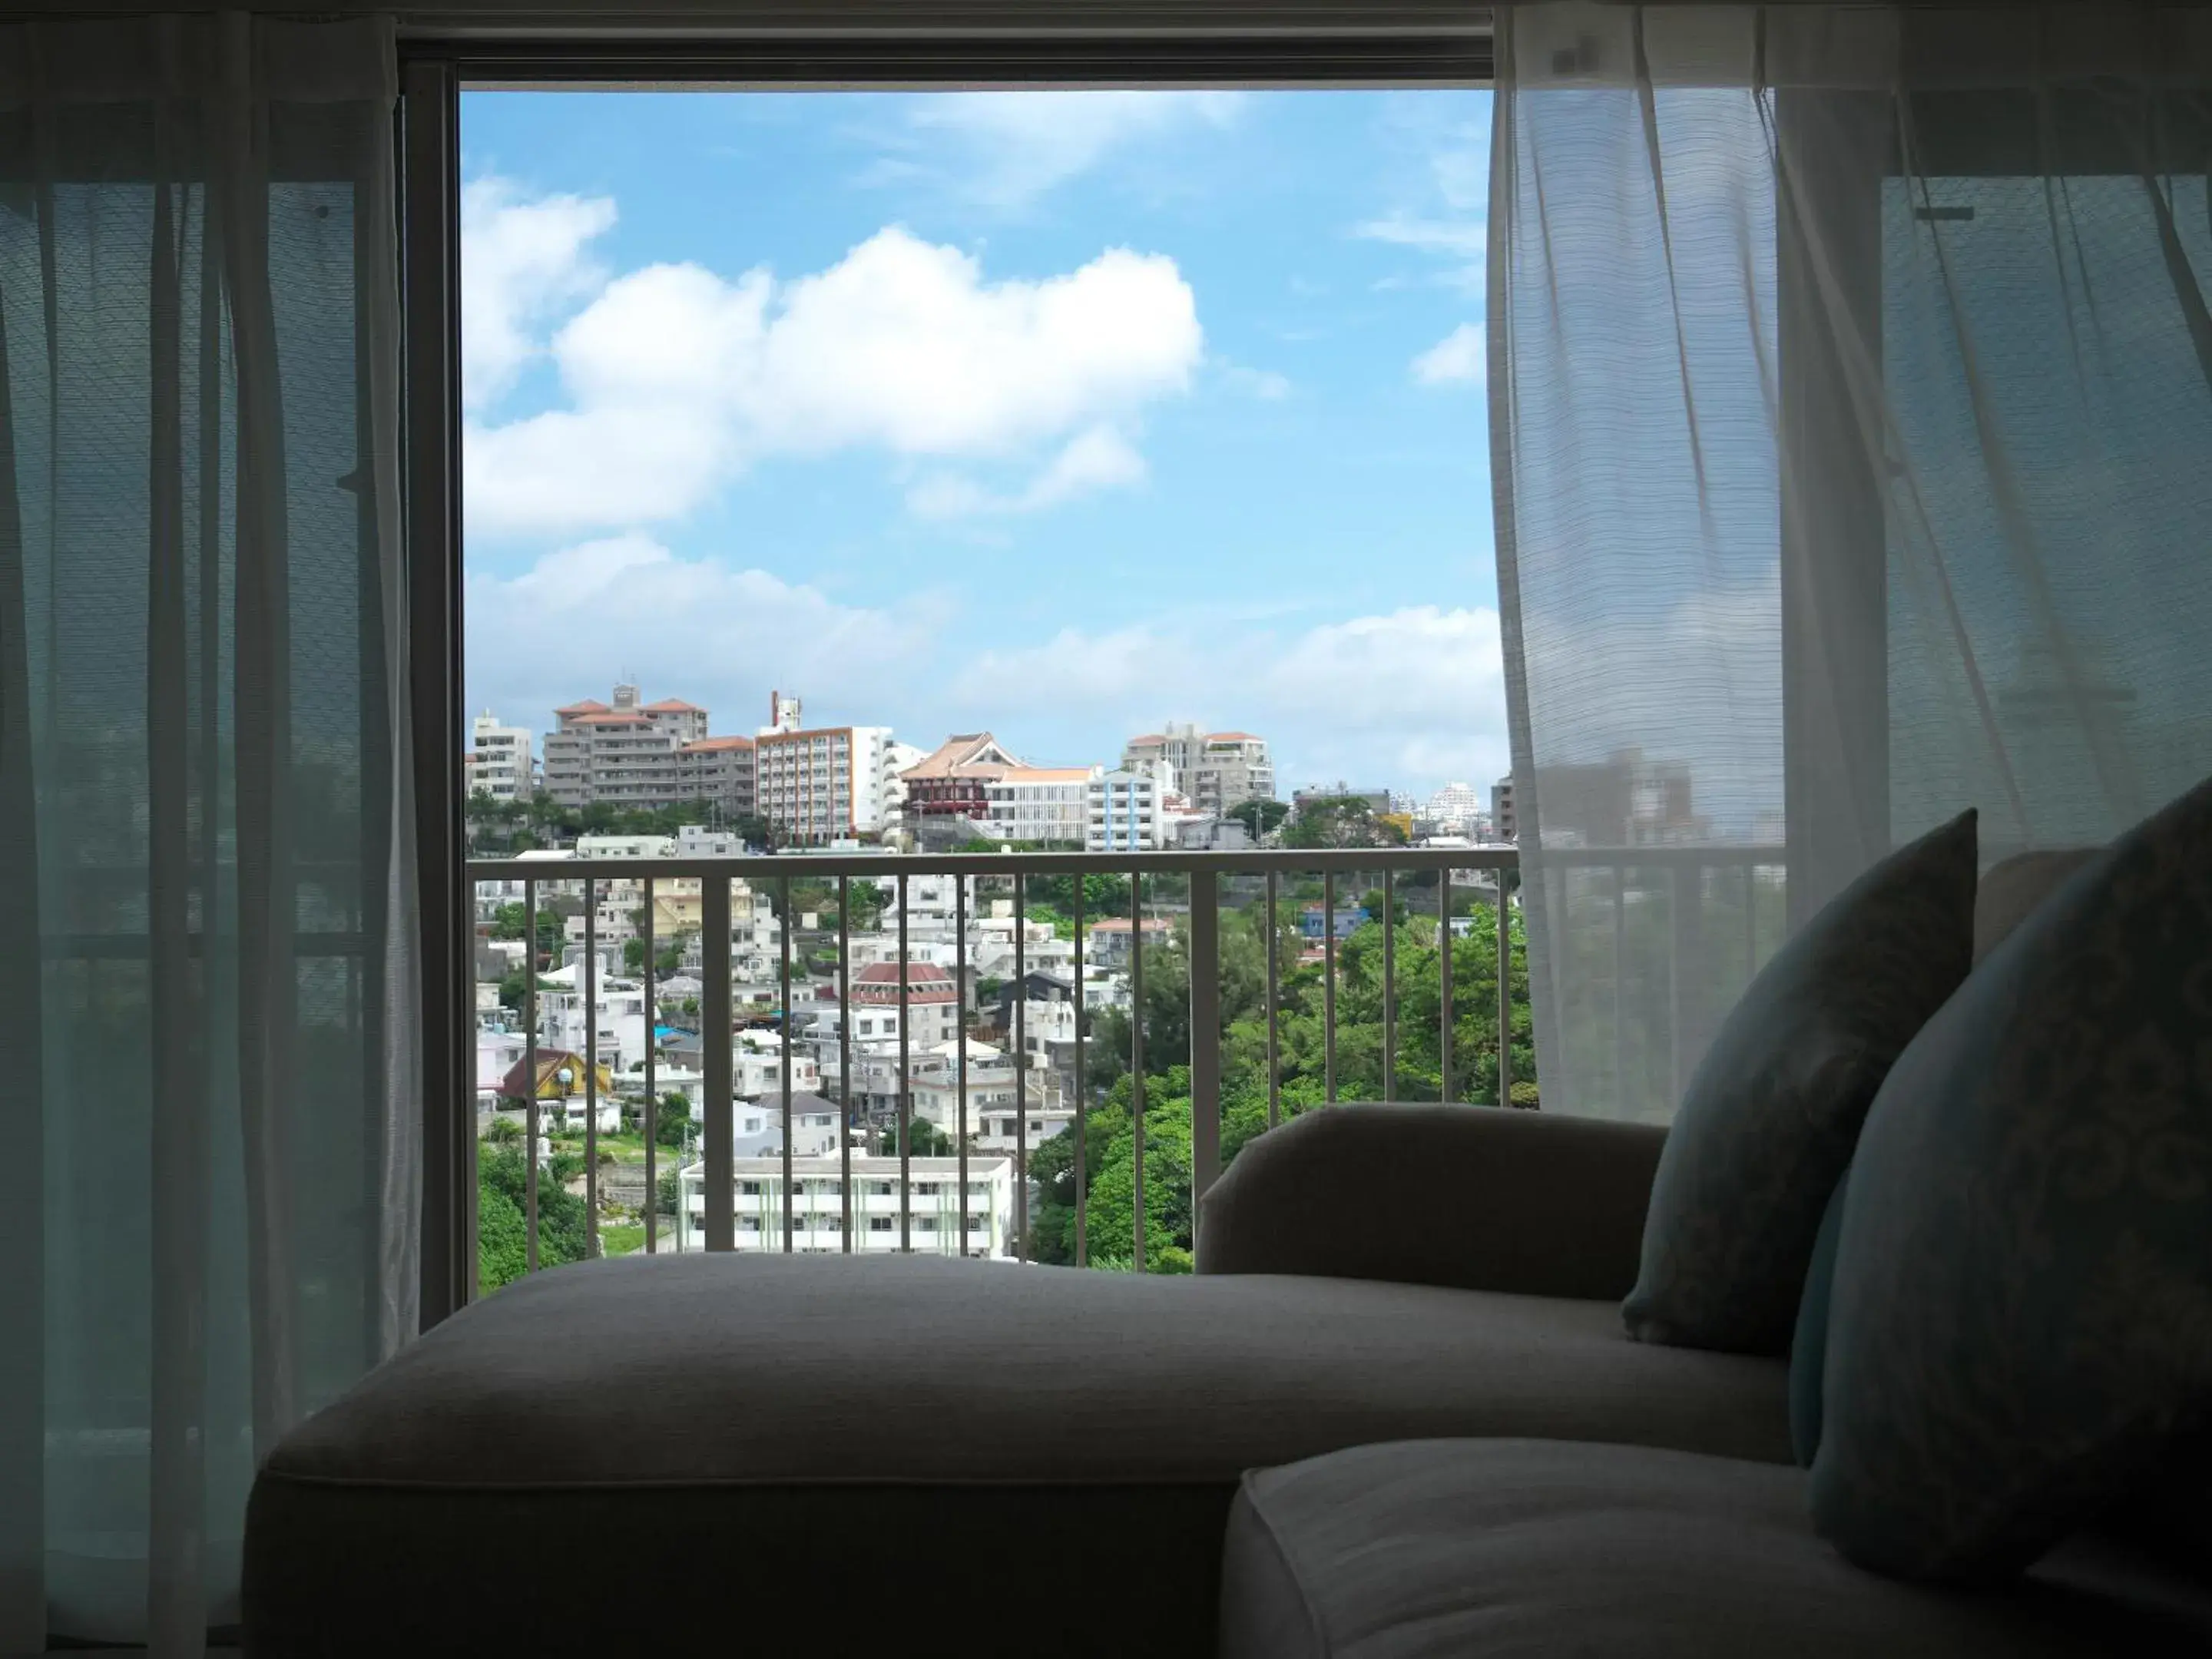 Day in Cozy Stay in Naha